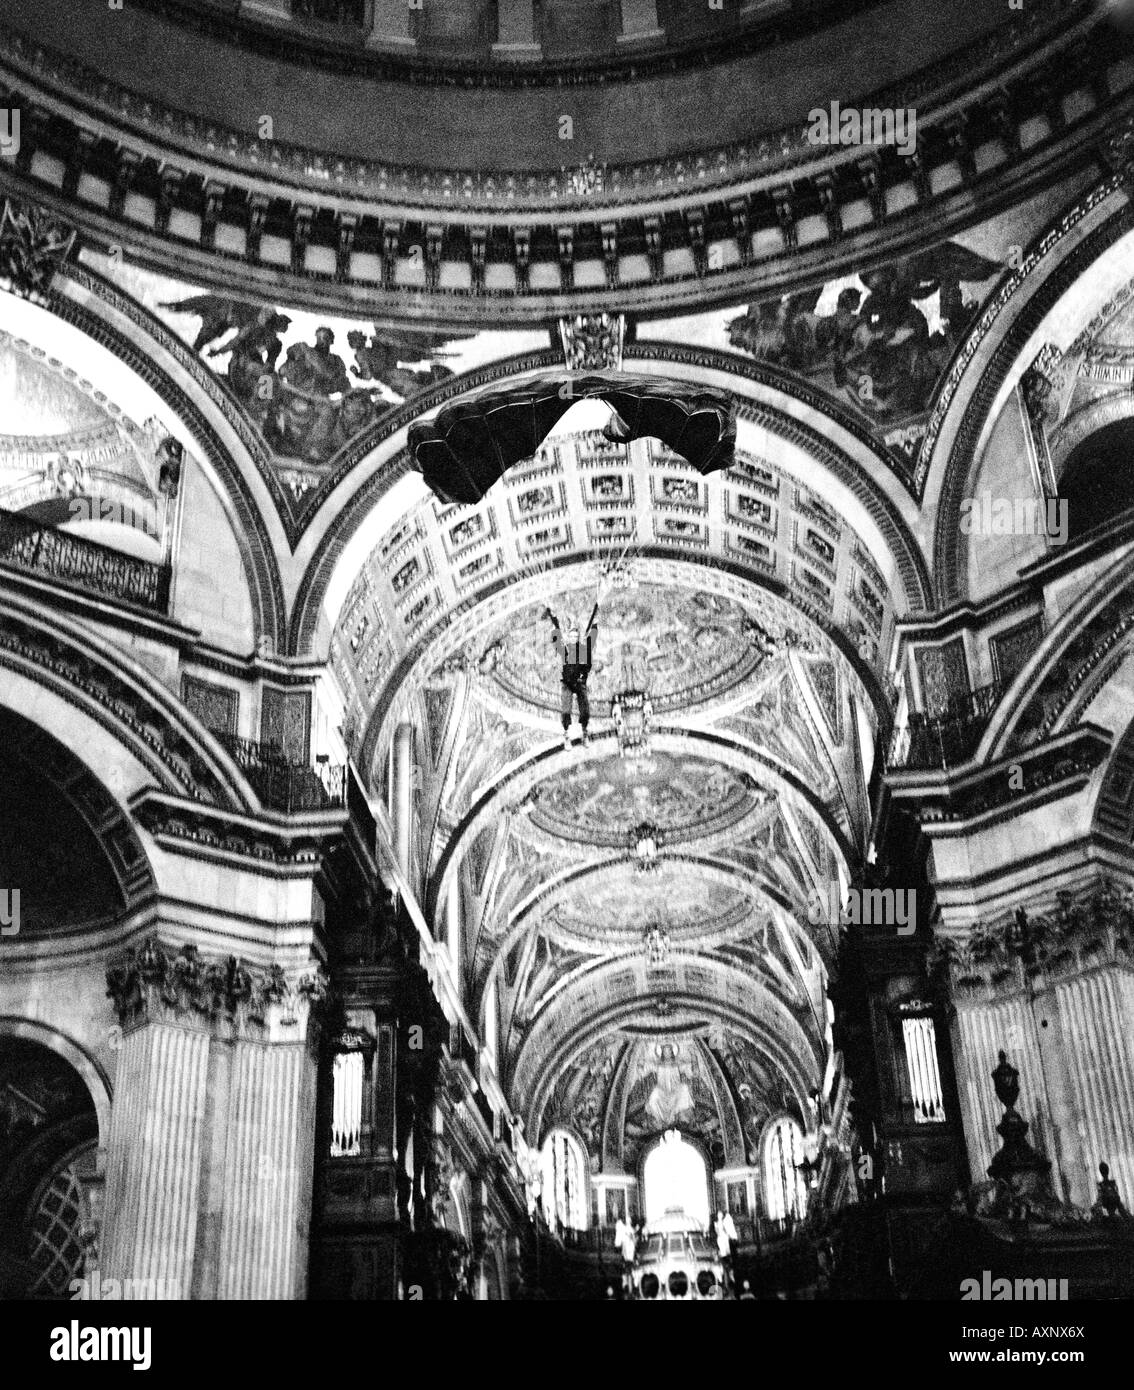 Russell Powell BASE 230 BASE Jumping from the Whispering Gallery inside St Pauls Cathedral London. Picture copyright Doug Blane. Stock Photo